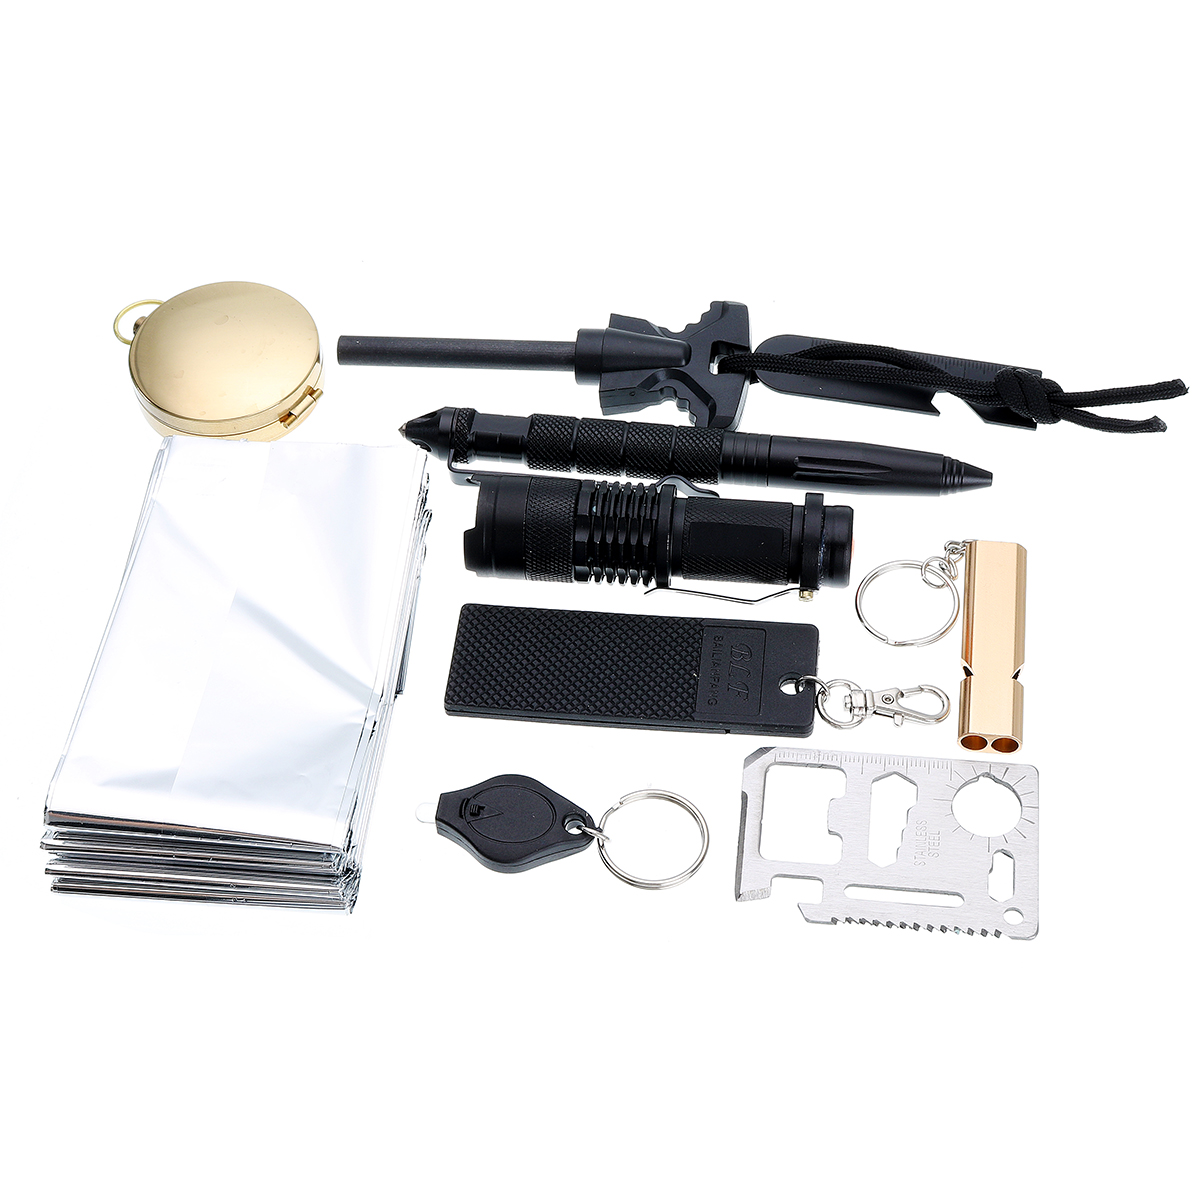 

Emergency SOS Survival Tools Kit Survival Gear Kit With Umbrella Rope Compass Whistle Carabiner